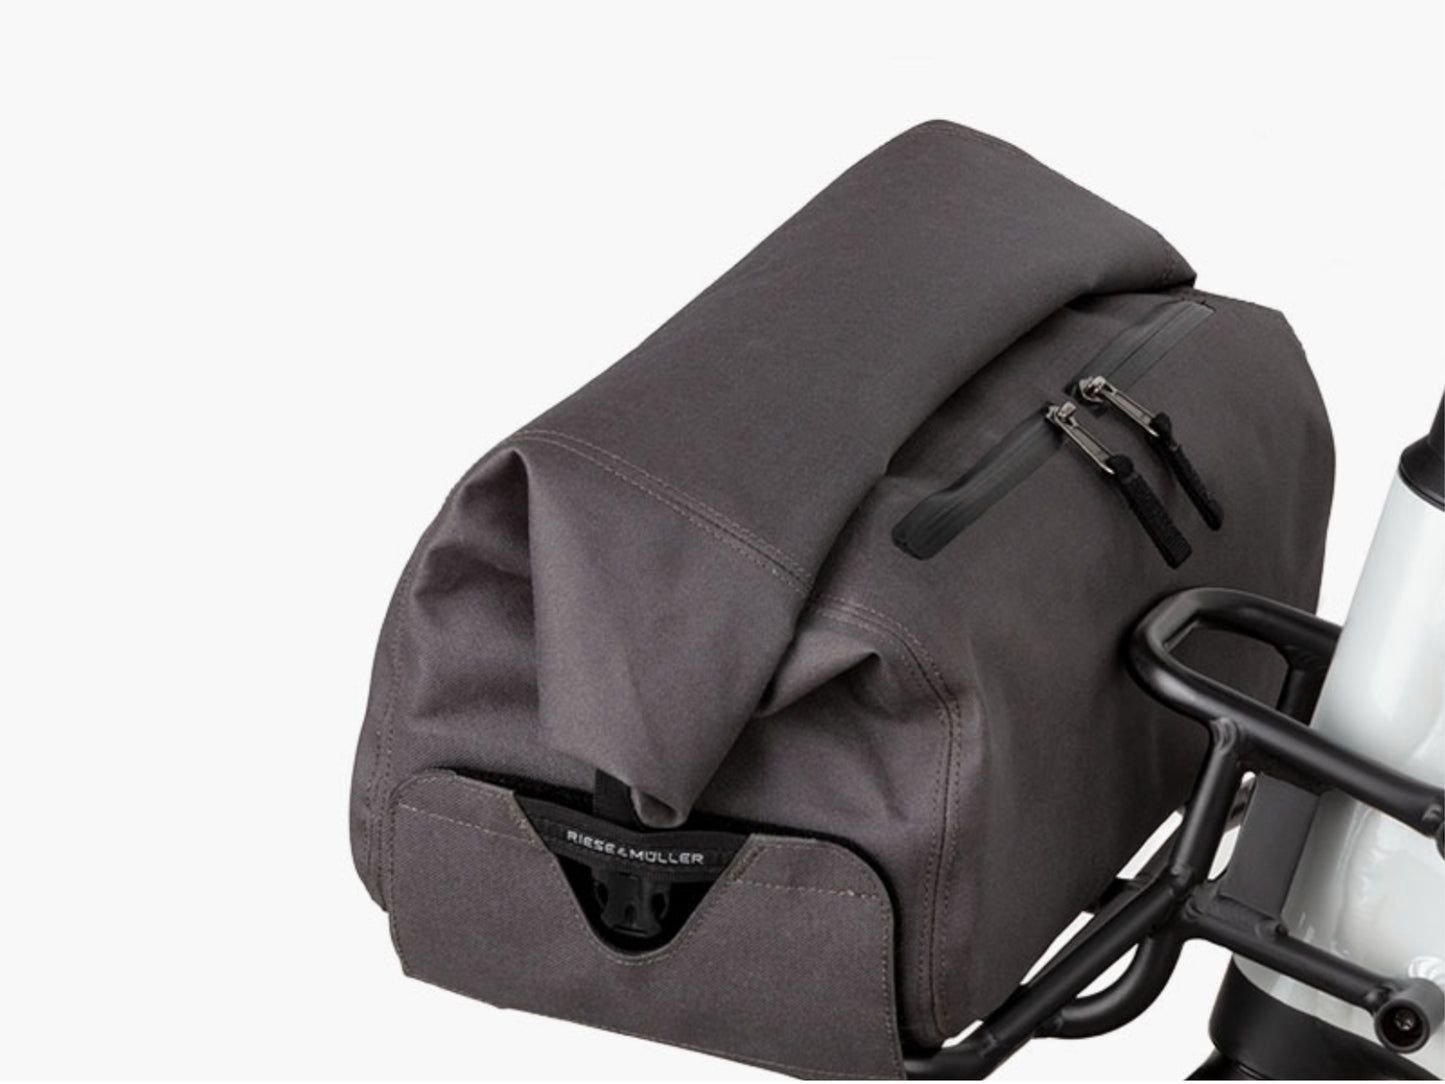 Riese and Muller Multicharger Mixte GT Vario 750 emtb hardtail close up front carrier bag option